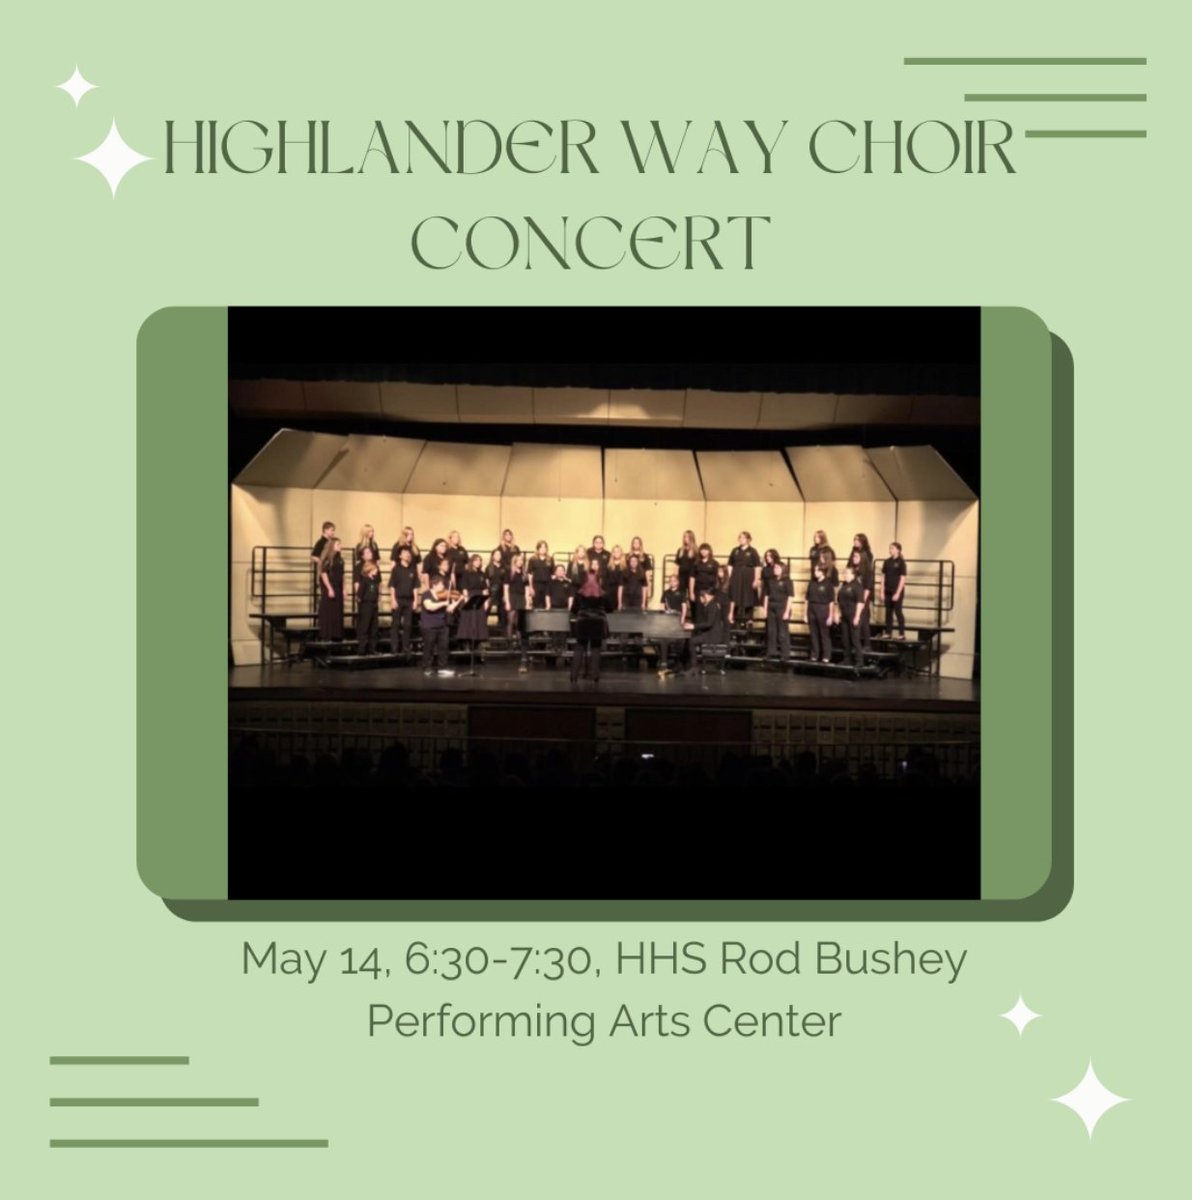 Highlander Way Middle School presents the Spring Choir Concert at the Howell Rod Bushey Performing Arts Center. See you there! #OneHowell #HighlanderNation